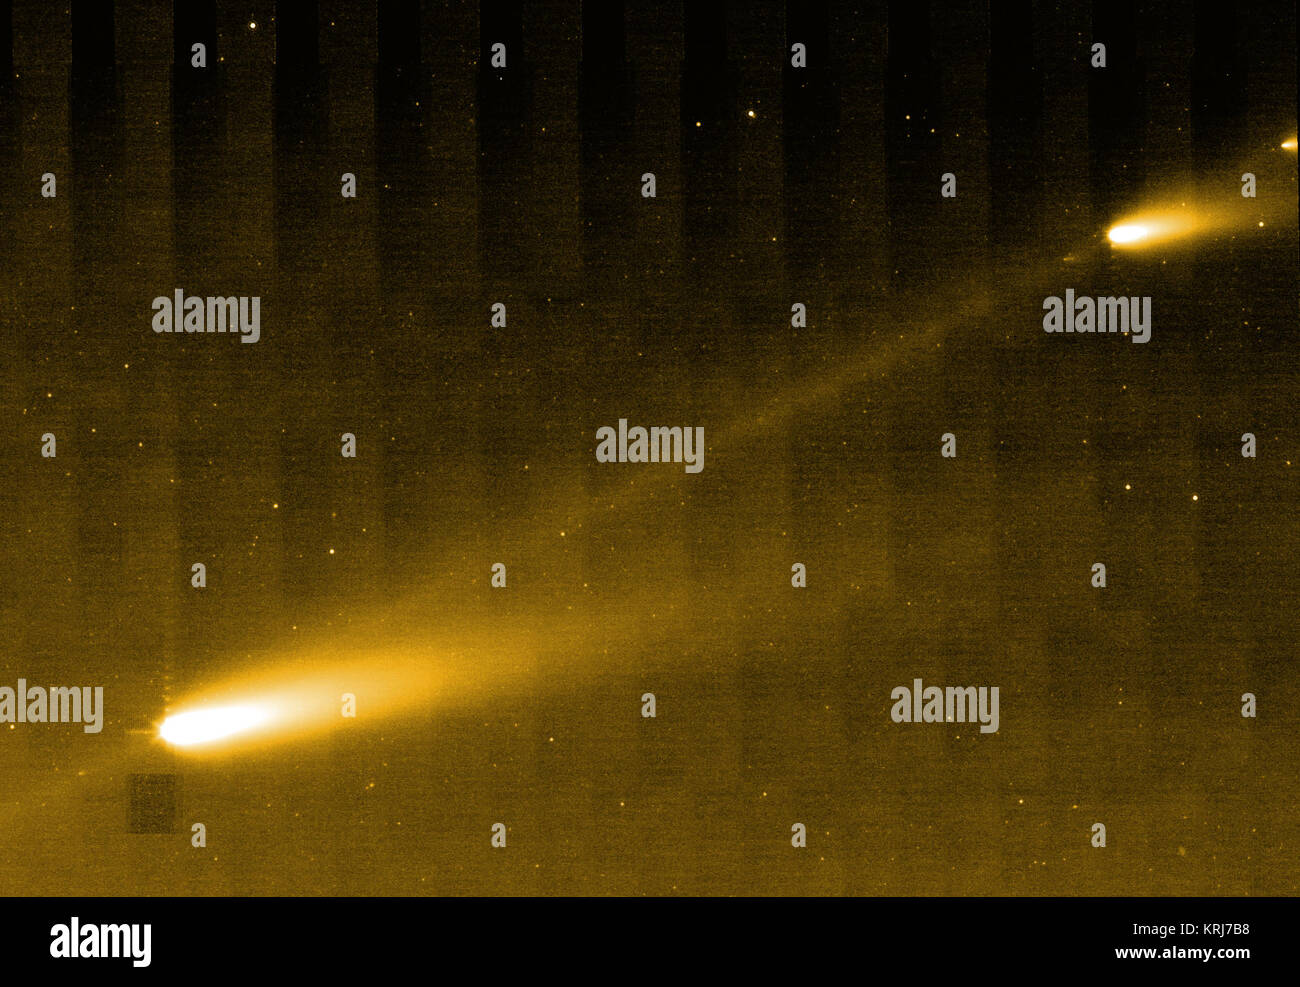 This image from NASA's Spitzer Space Telescope shows three of the many fragments making up Comet 73P/Schwassman-Wachmann 3. The infrared picture also provides the best look yet at the crumbling comet's trail of debris, seen here as a bridge connecting the larger fragments.  The comet circles around our sun every 5.4 years. In 1995, it splintered apart into four pieces, labeled A through D, with C being the biggest. Since then, the comet has continued to fracture into dozens of additional pieces. This image is centered about midway between fragments C and B; fragment G can be seen in the upper  Stock Photo